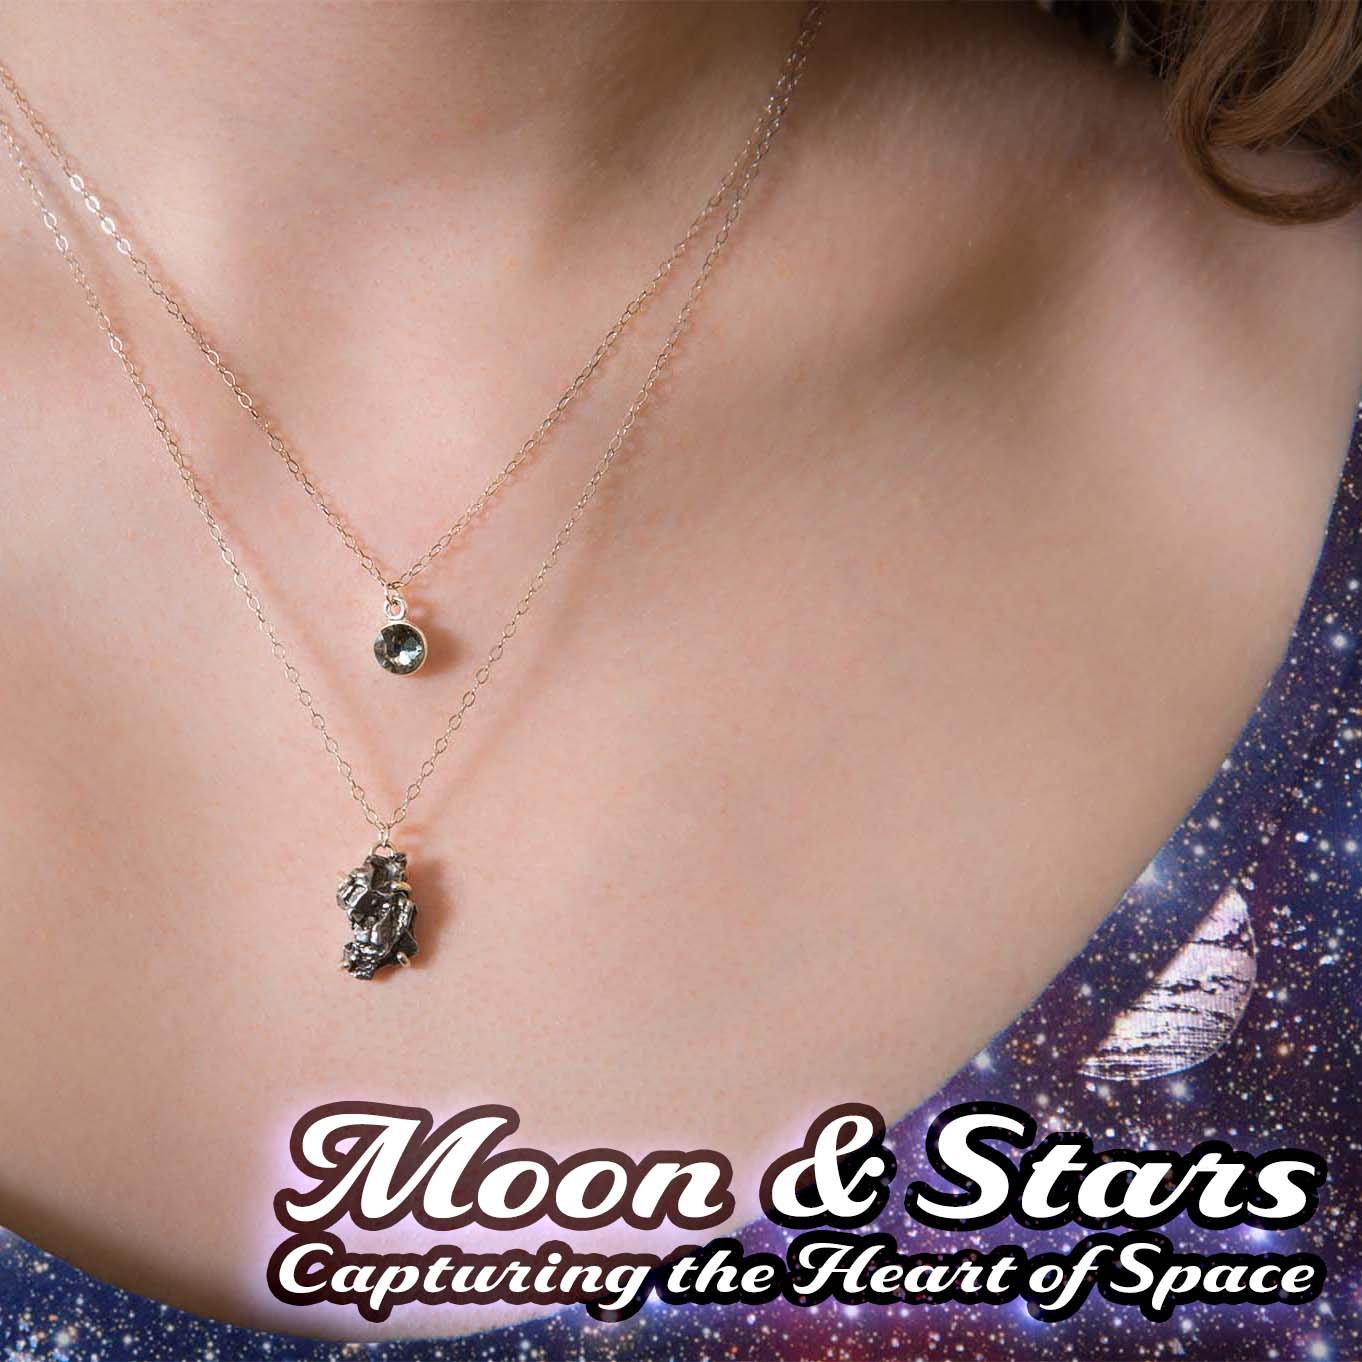 Moon & Stars Necklace - Capturing the Heart of Space